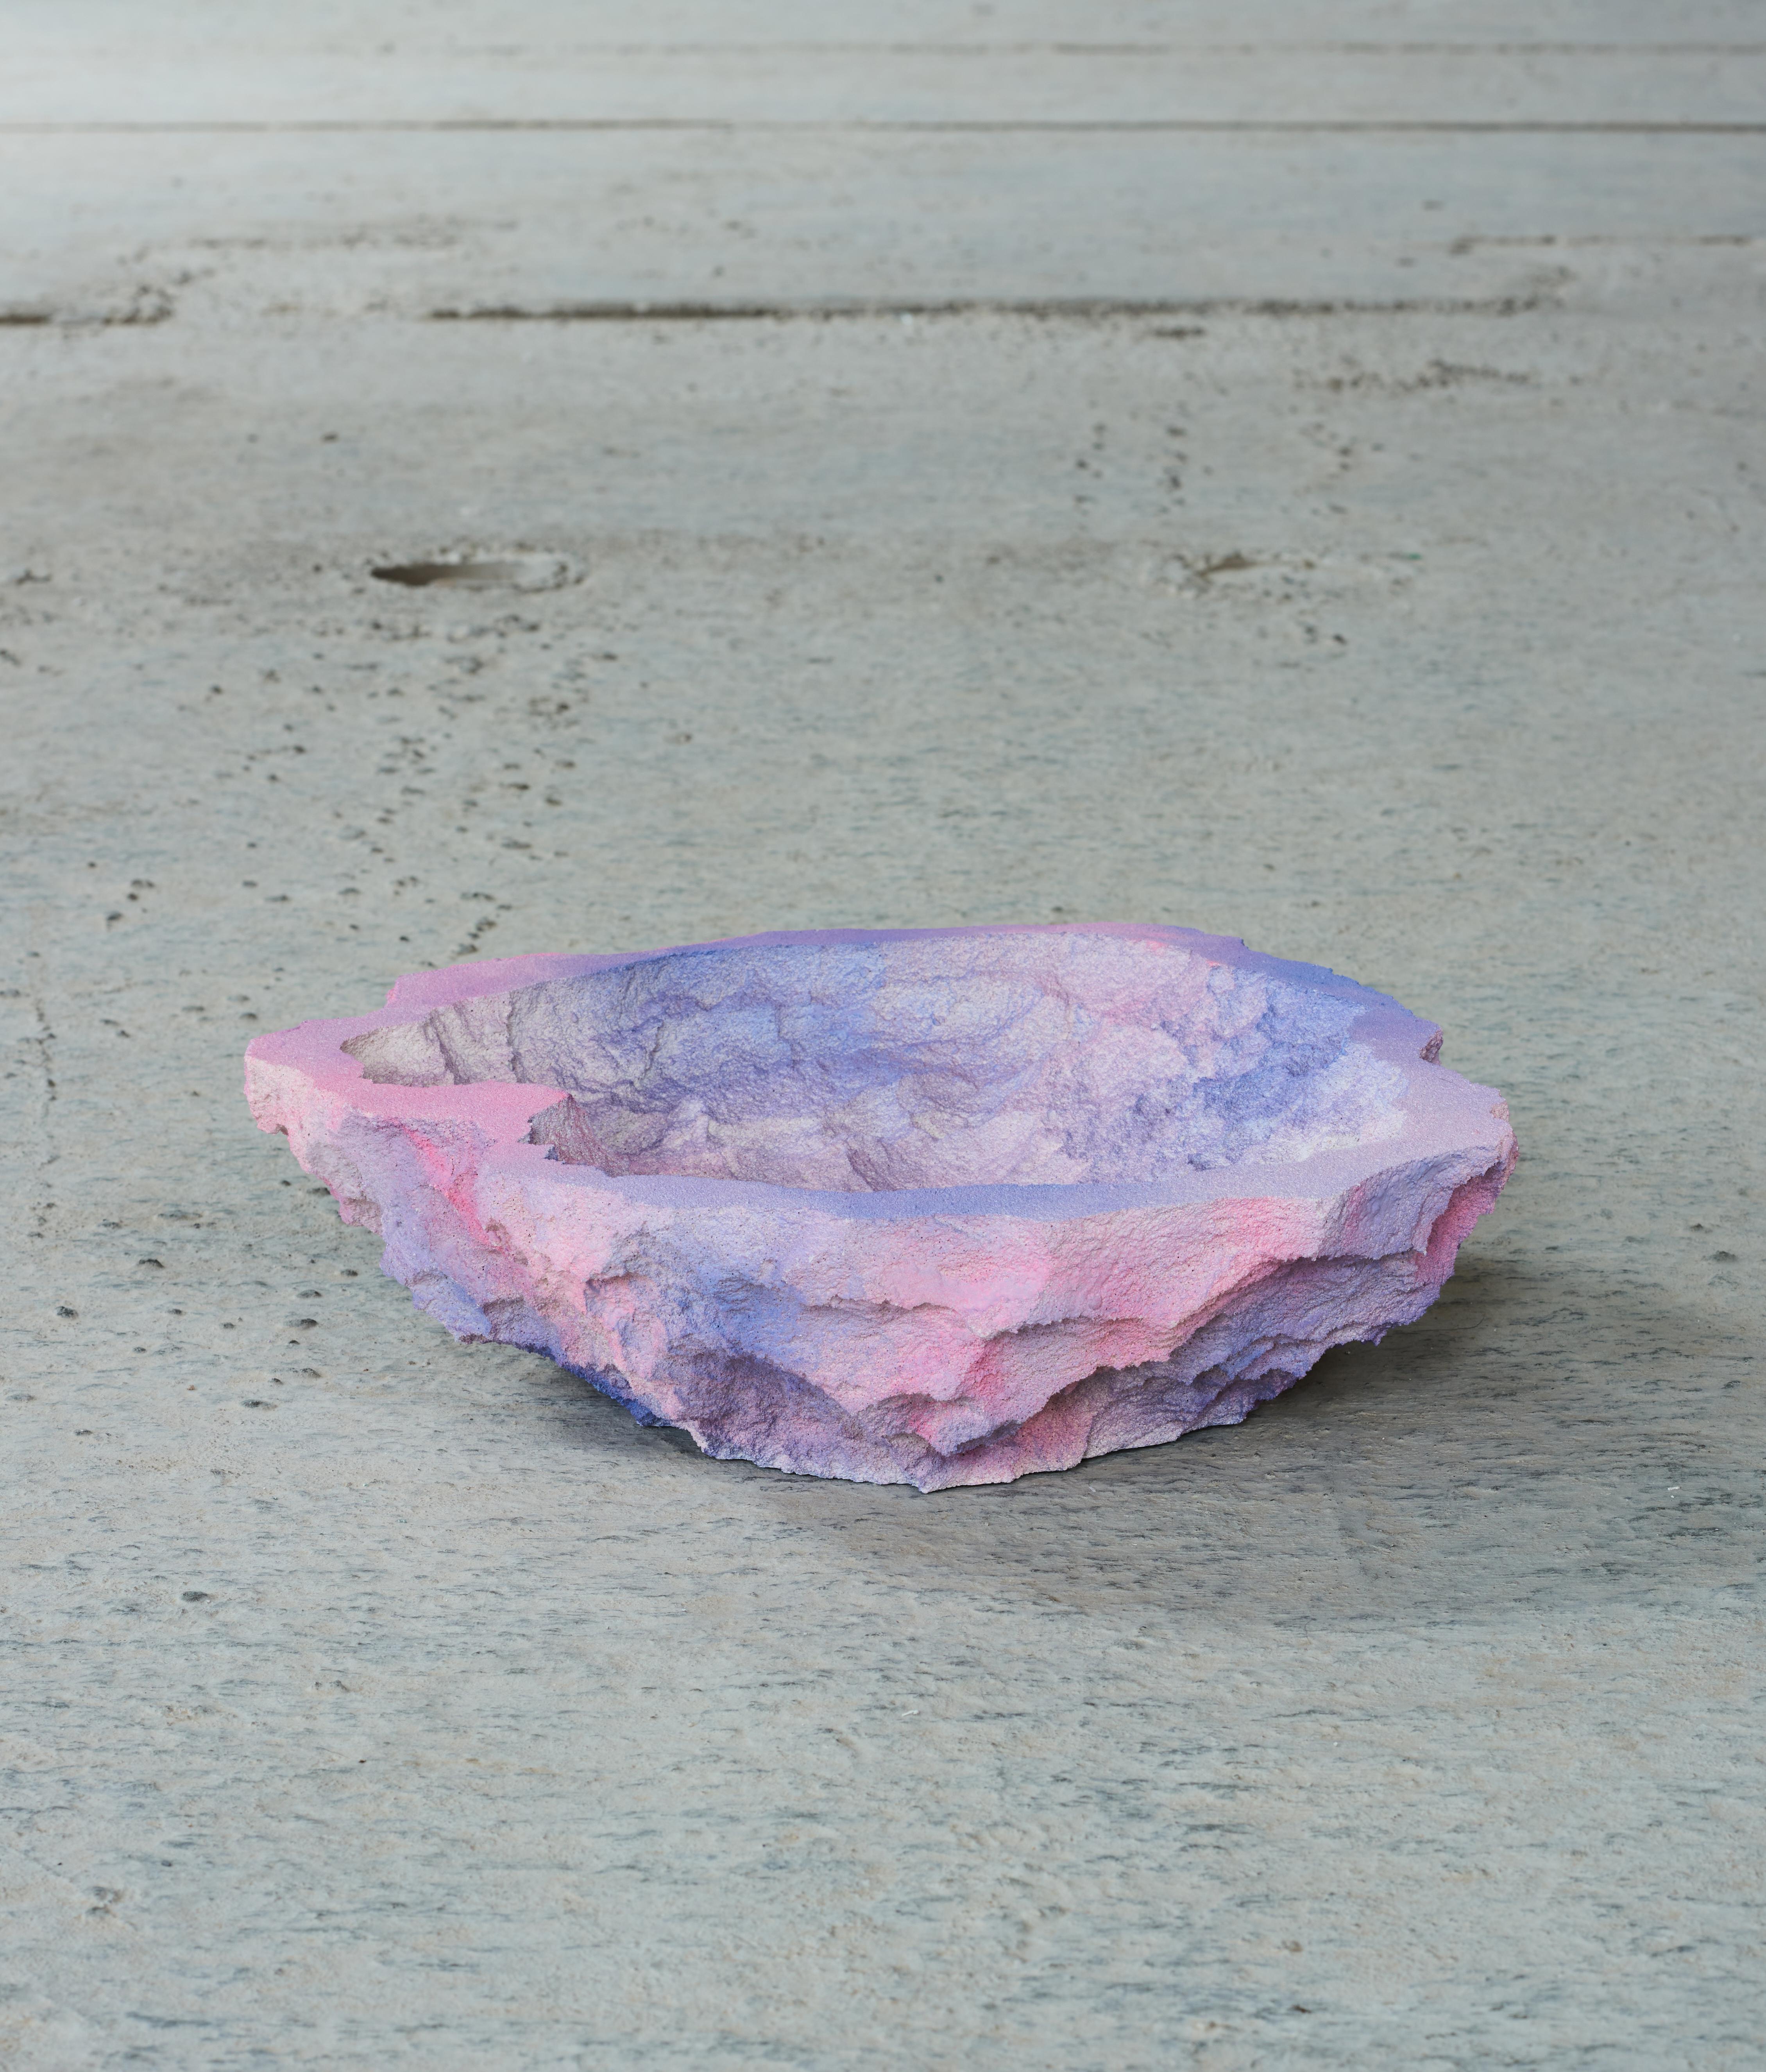 One of a kind - contemporary design, rock crystal bowl, embody the surface of rocks and stone.
Made by the art and design duo Andredottir & Bobek

They have in this collection imitated landscape with artificial materials and created an artificial